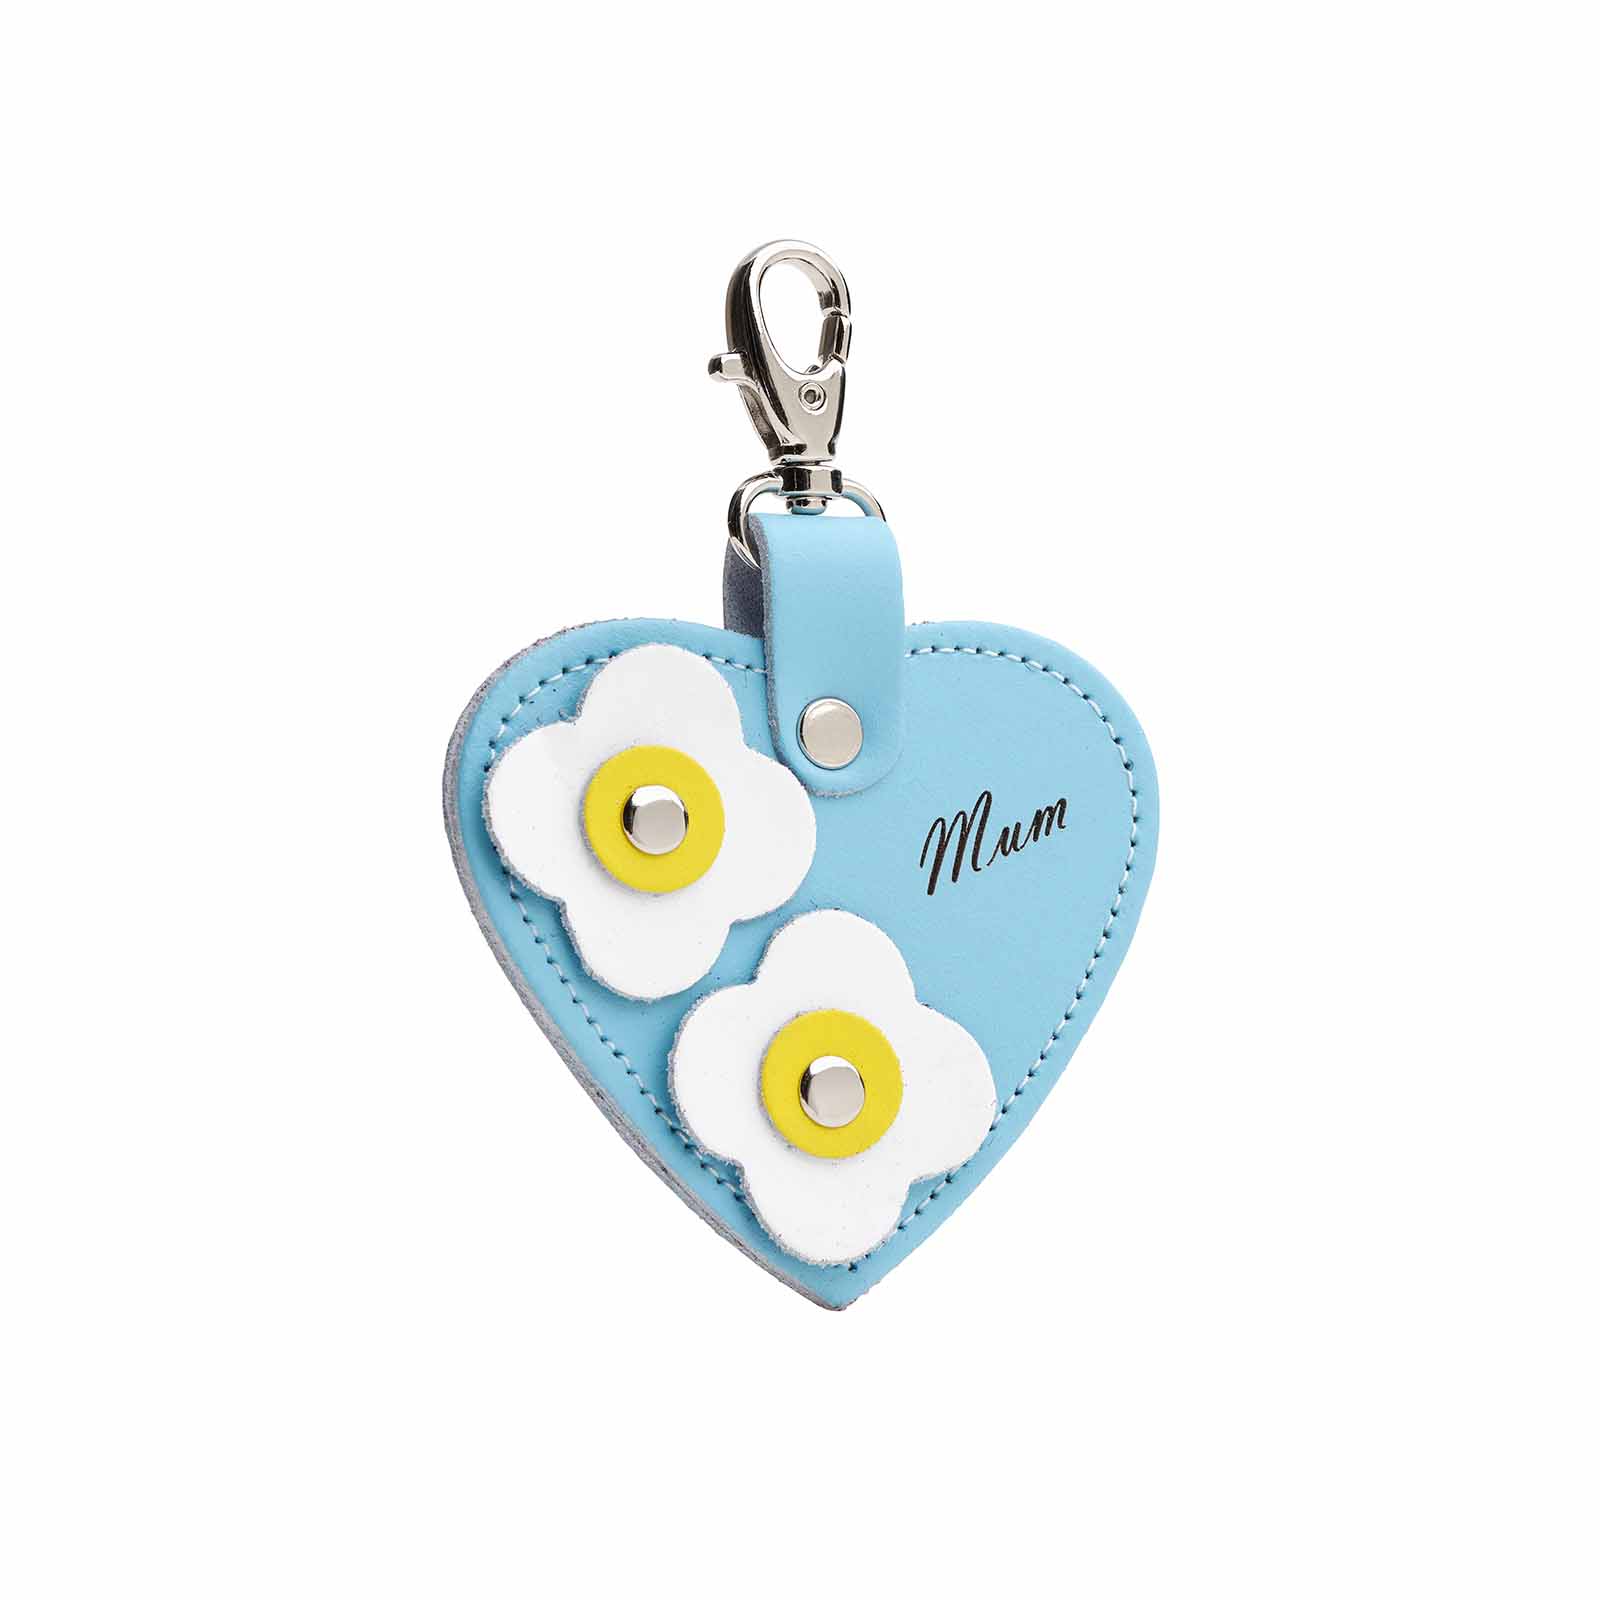 Love heart bag charm - with ’Mum’ engraving and flower appliques - Pastel Blue